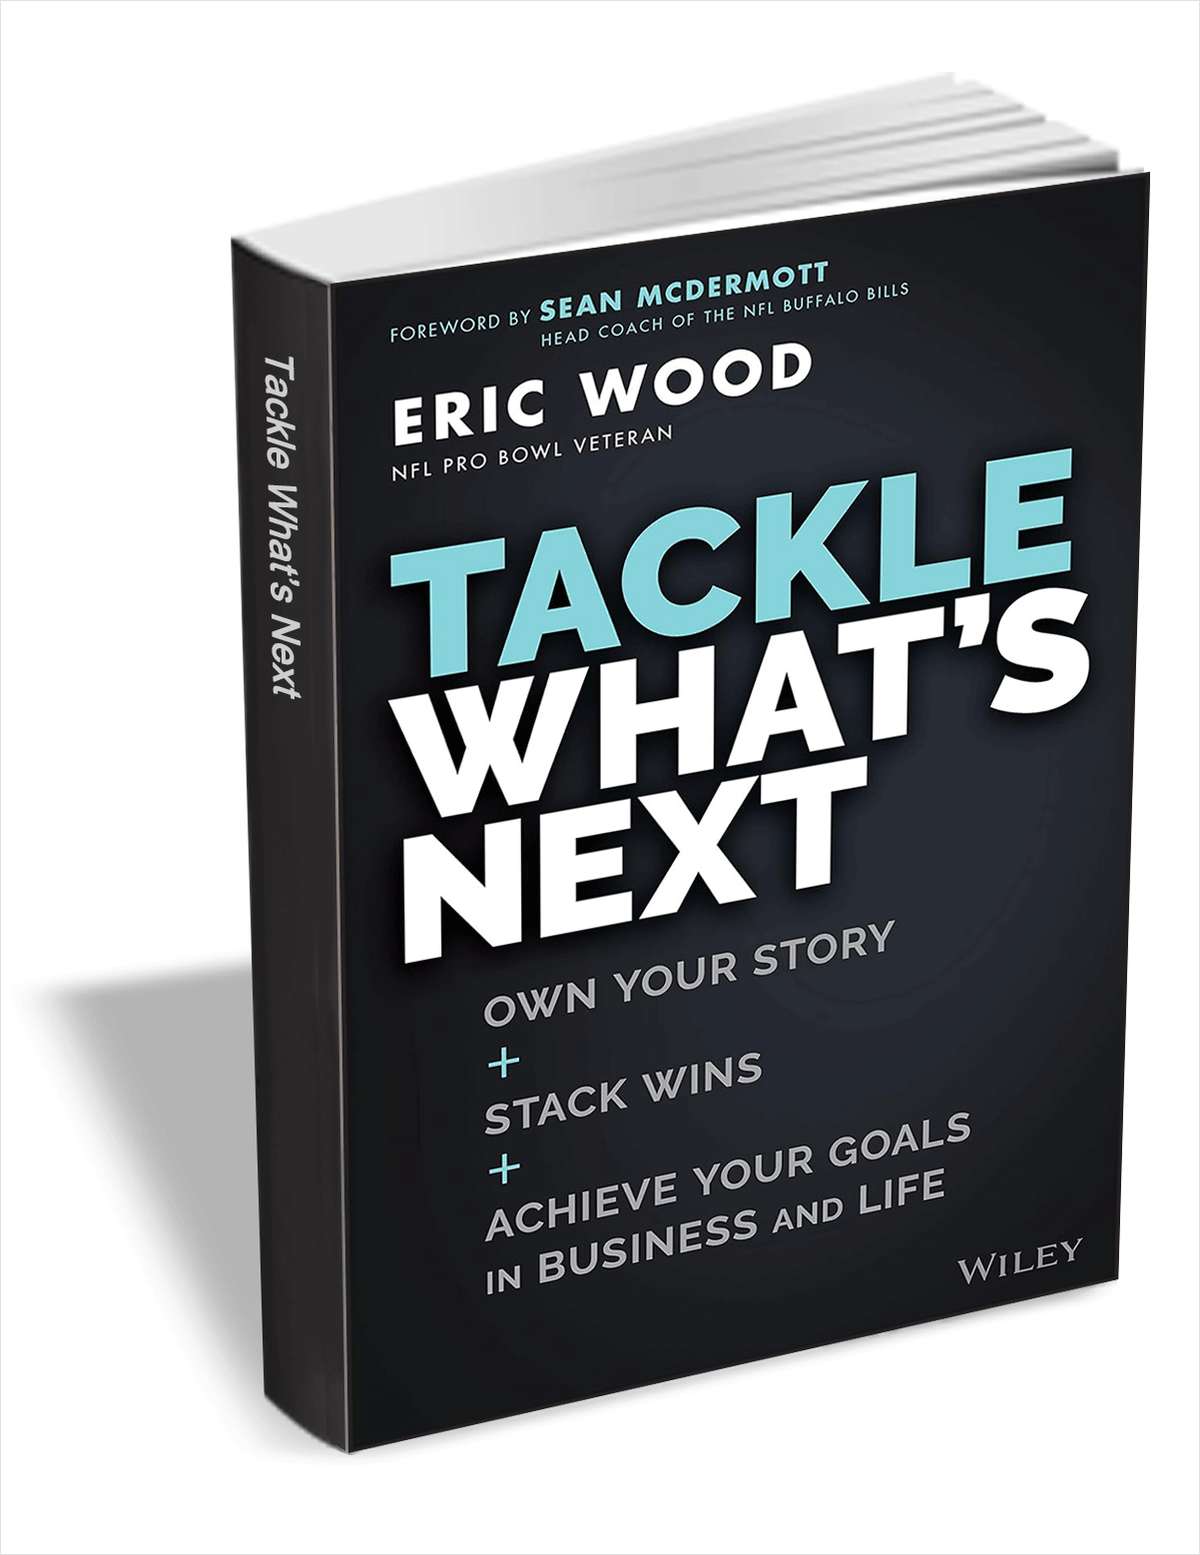 Tackle What's Next: Own Your Story, Stack Wins, and Achieve Your Goals in Business and Life ($16.00 Value) FREE for a Limited Time